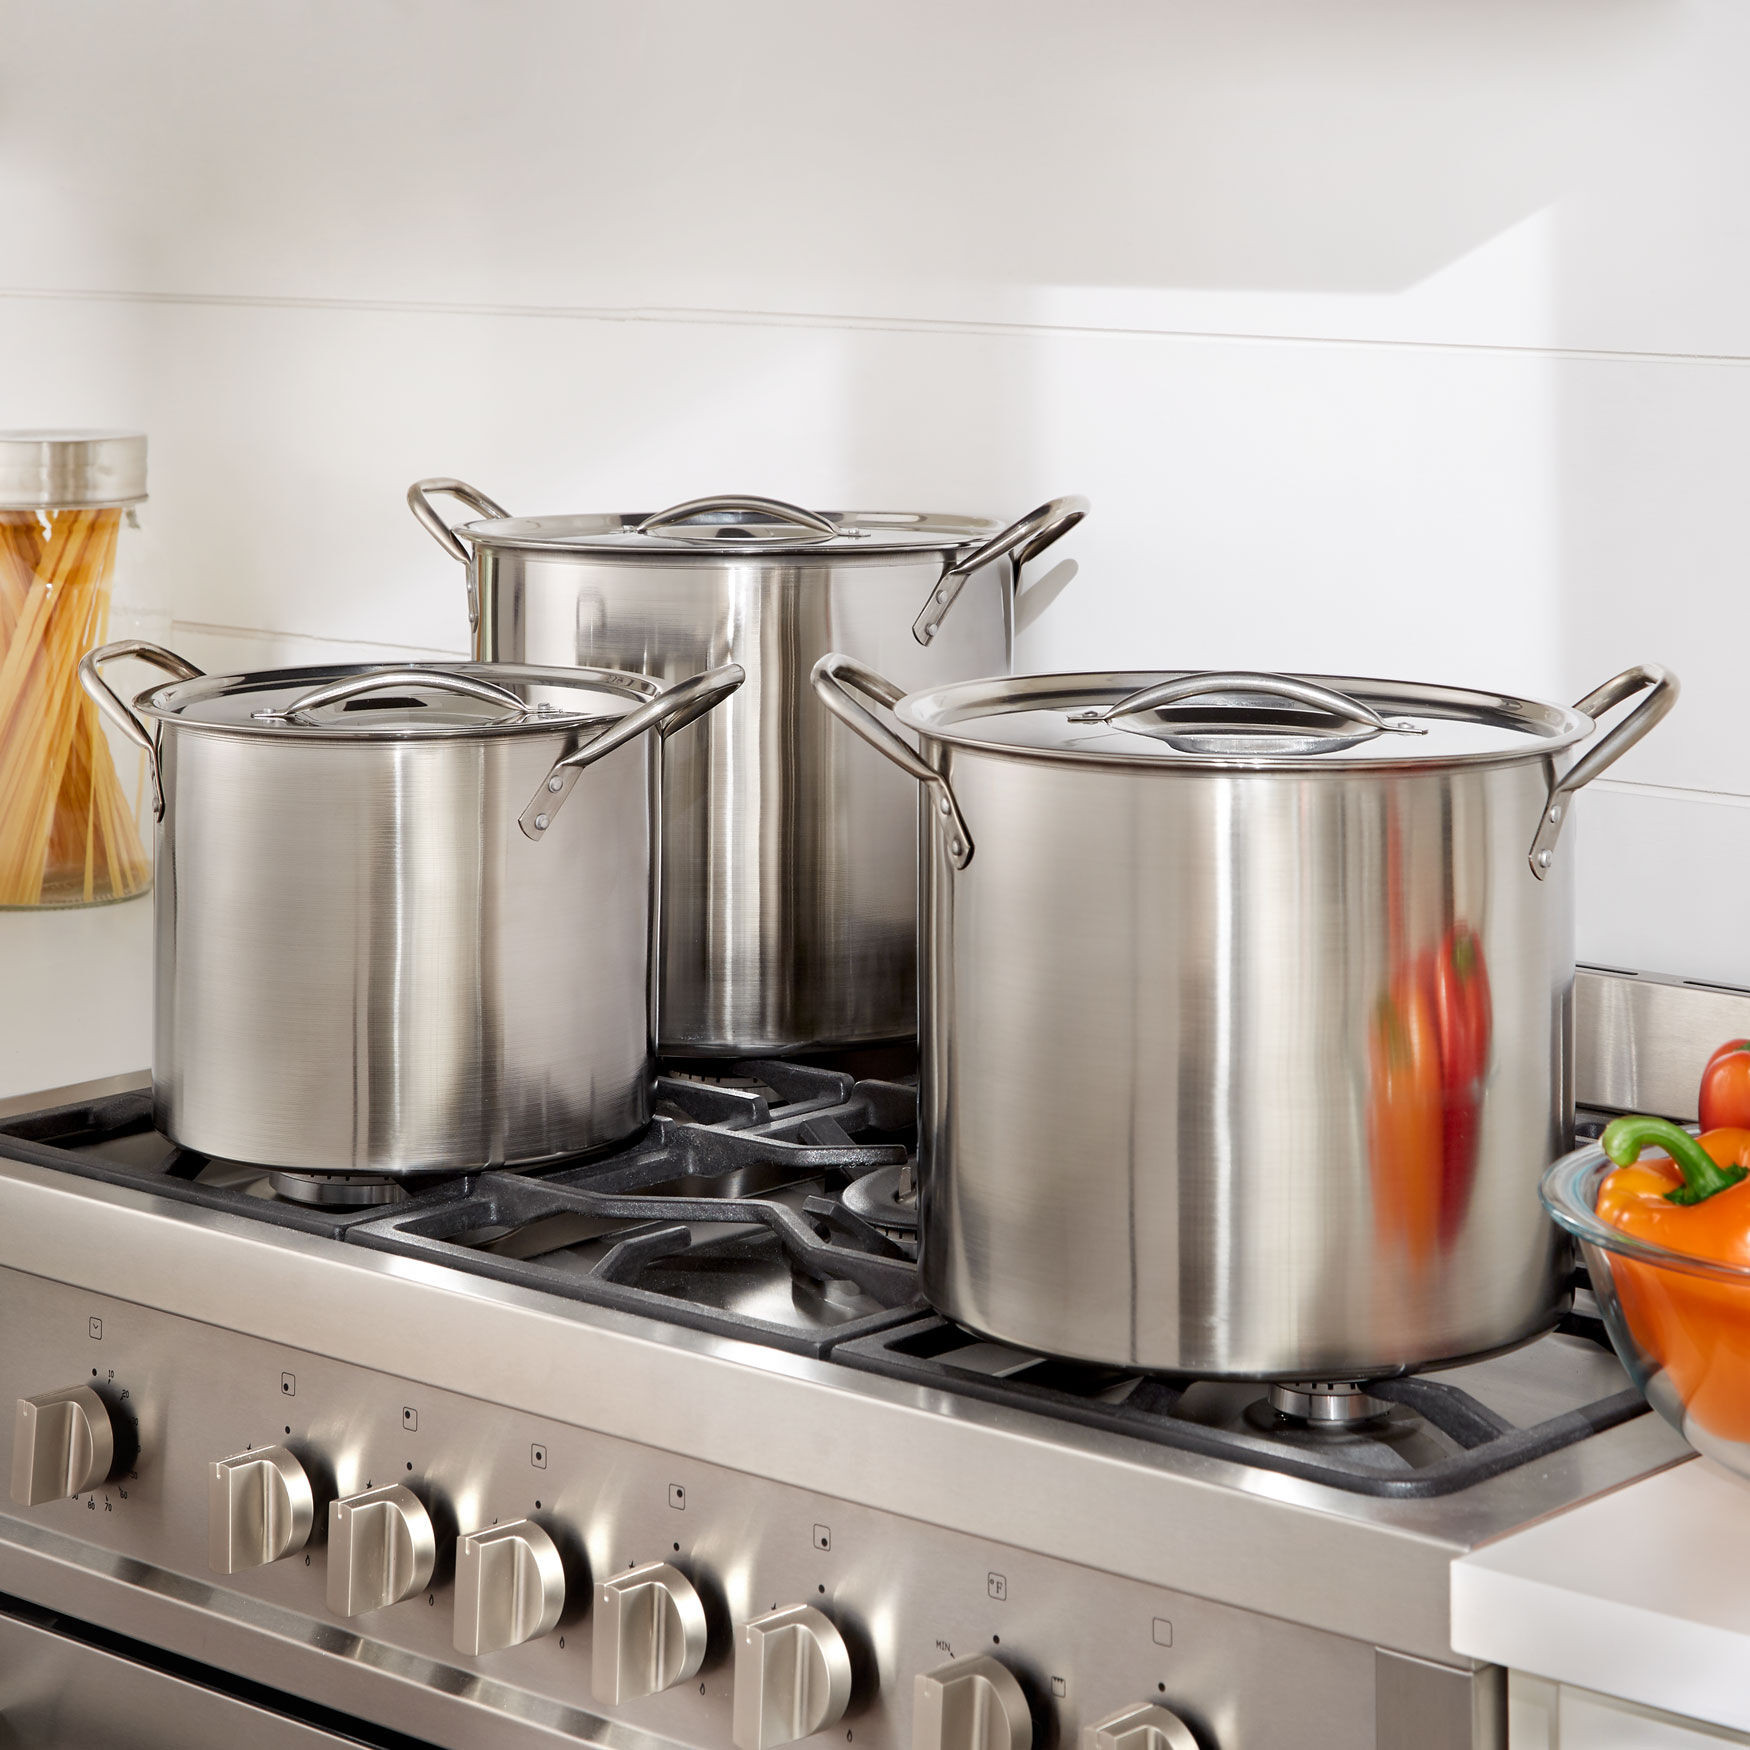 BrylaneHome 6-Pc. Stainless Steel Stockpot Set